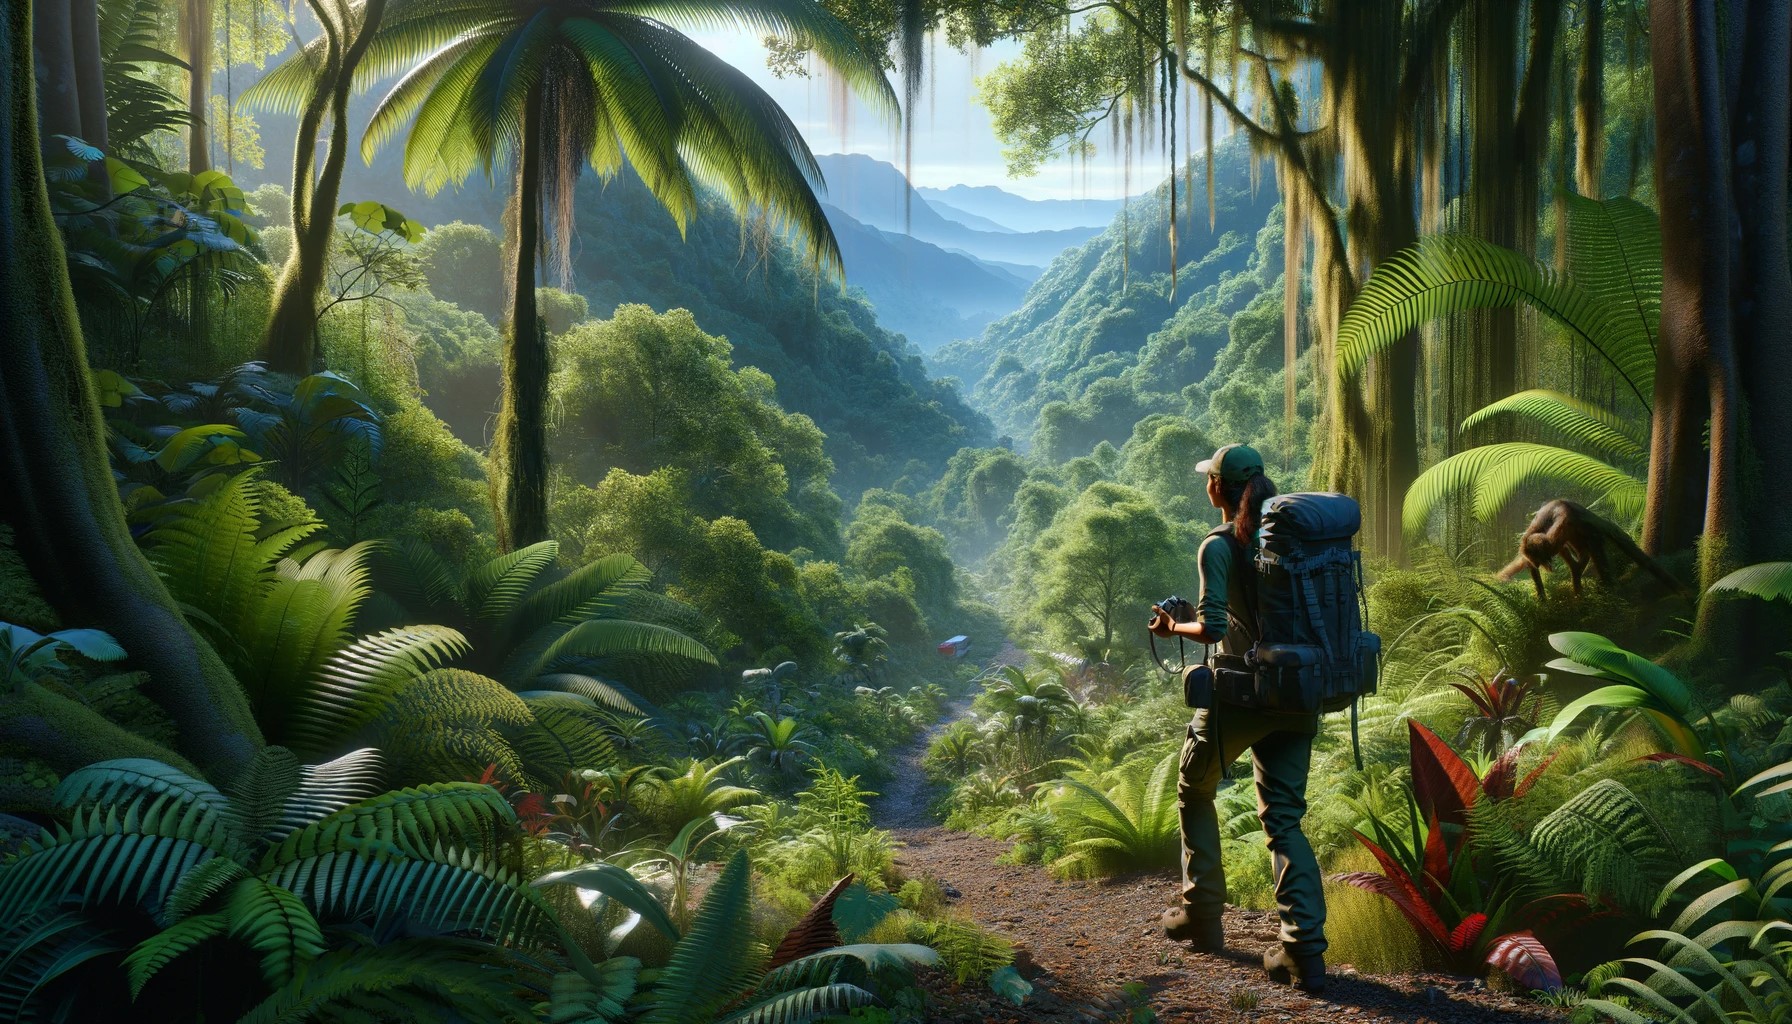 A realistic image of a female hiker exploring the dense, lush greenery of the Western Ghats